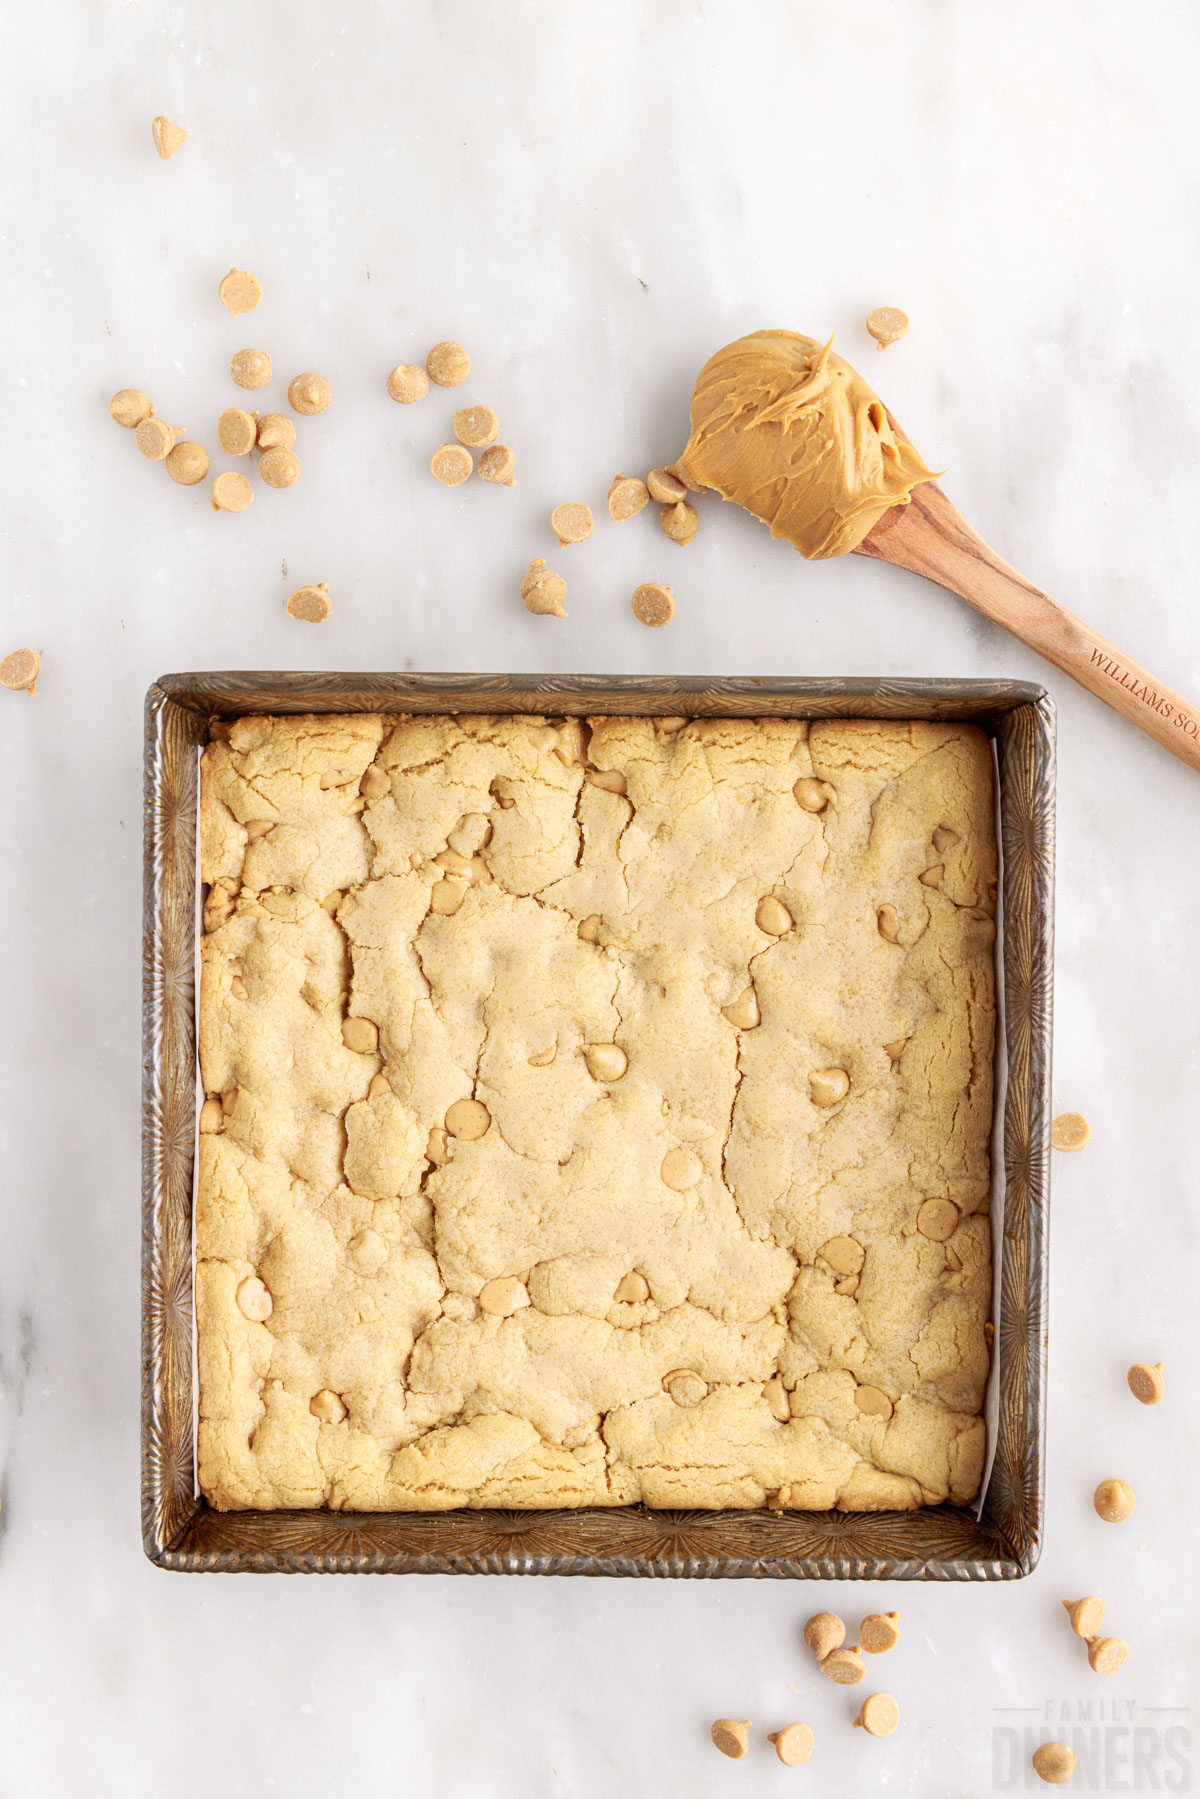 baked peanut bars in a baking pan